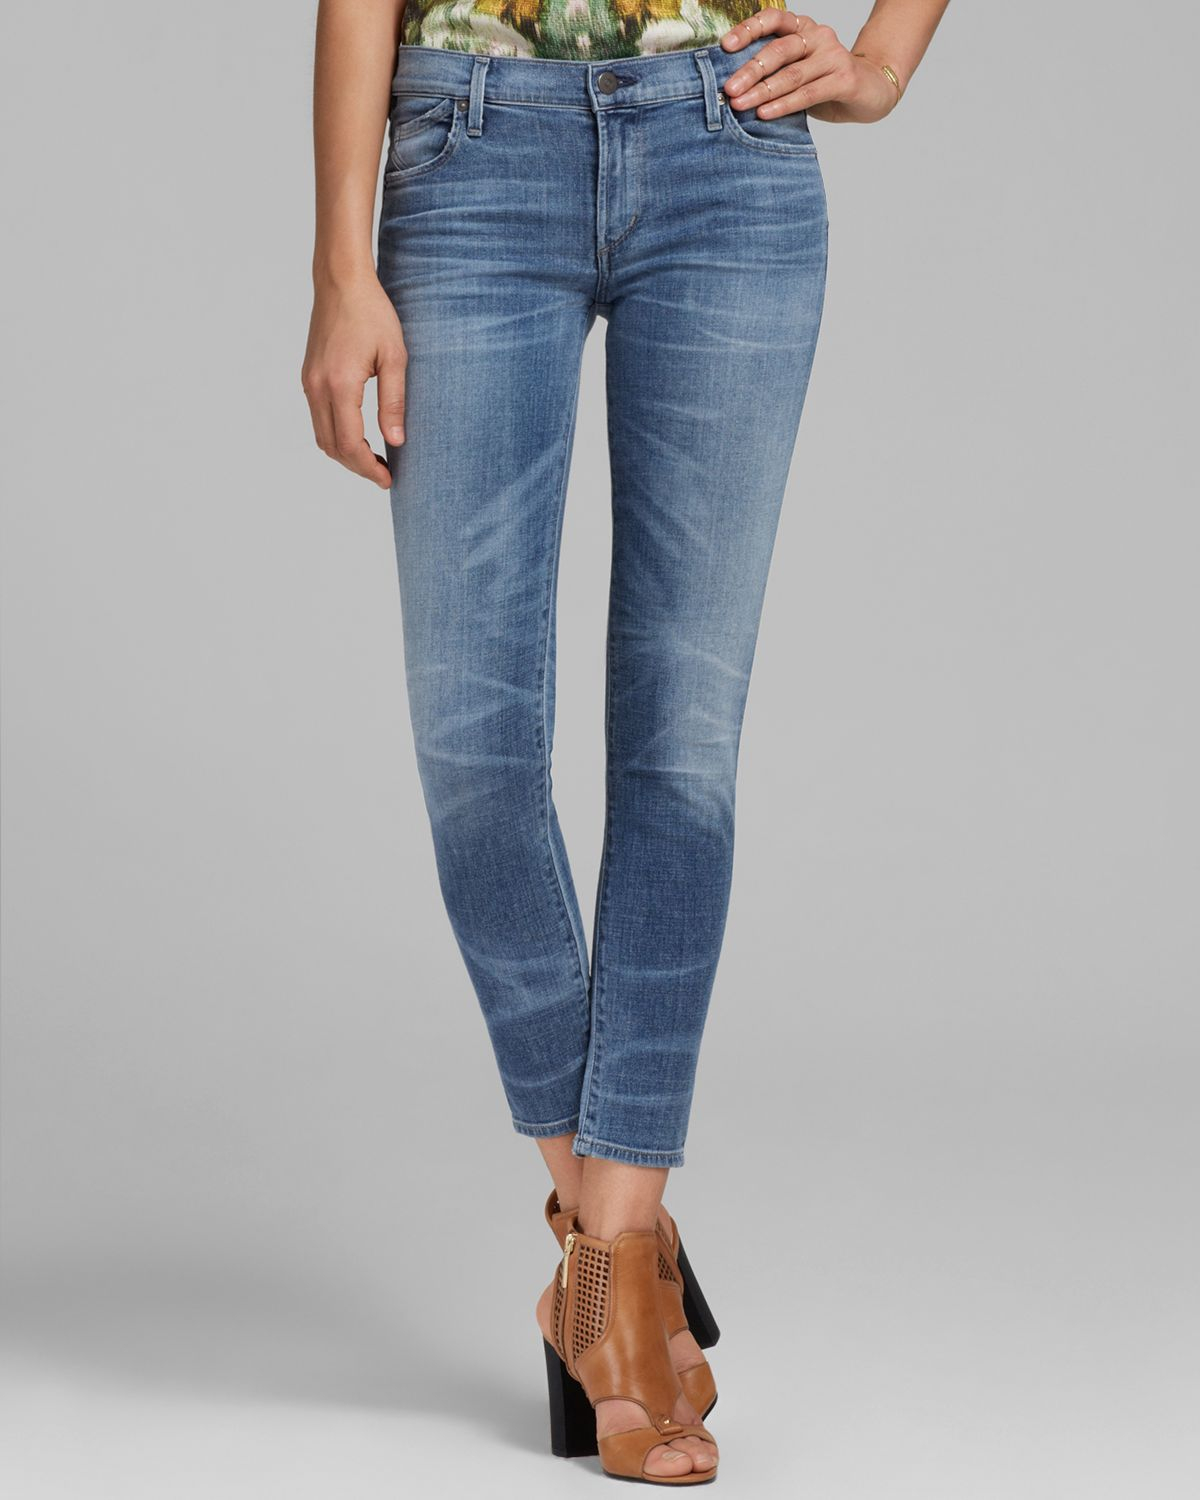 Lyst - Citizens Of Humanity Jeans - Avedon Ankle Skinny In Belize in Blue